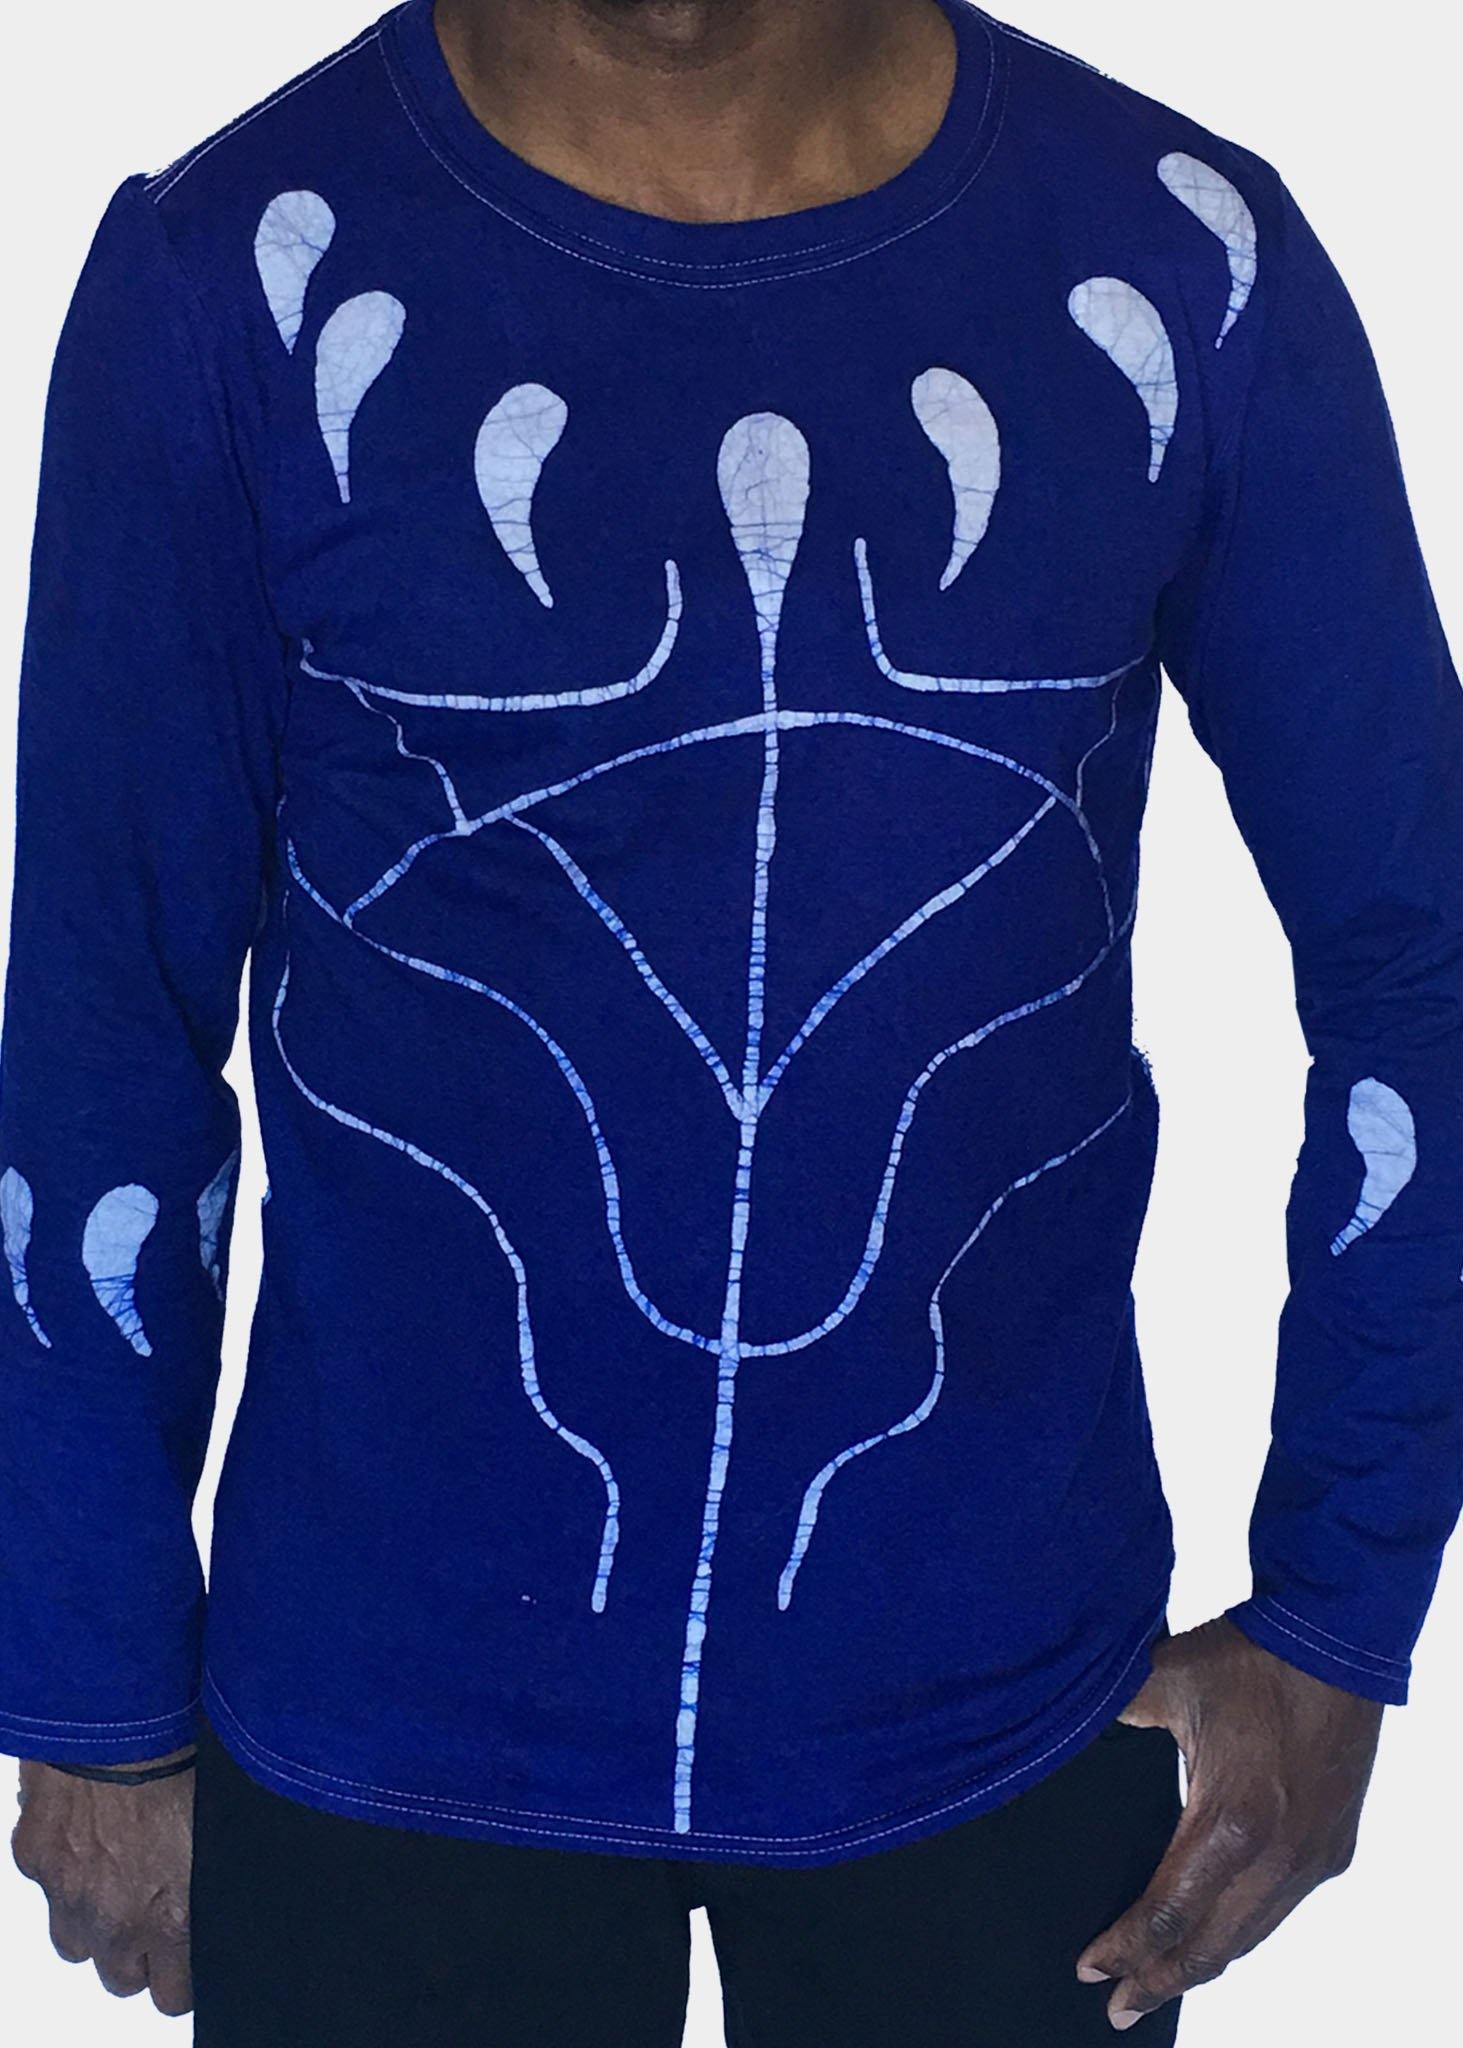 Blue and White Long Sleeve Batik T-Shirt with Black Panther Claws -Contemporary and Colorful Ensemble-African apparel and accessories